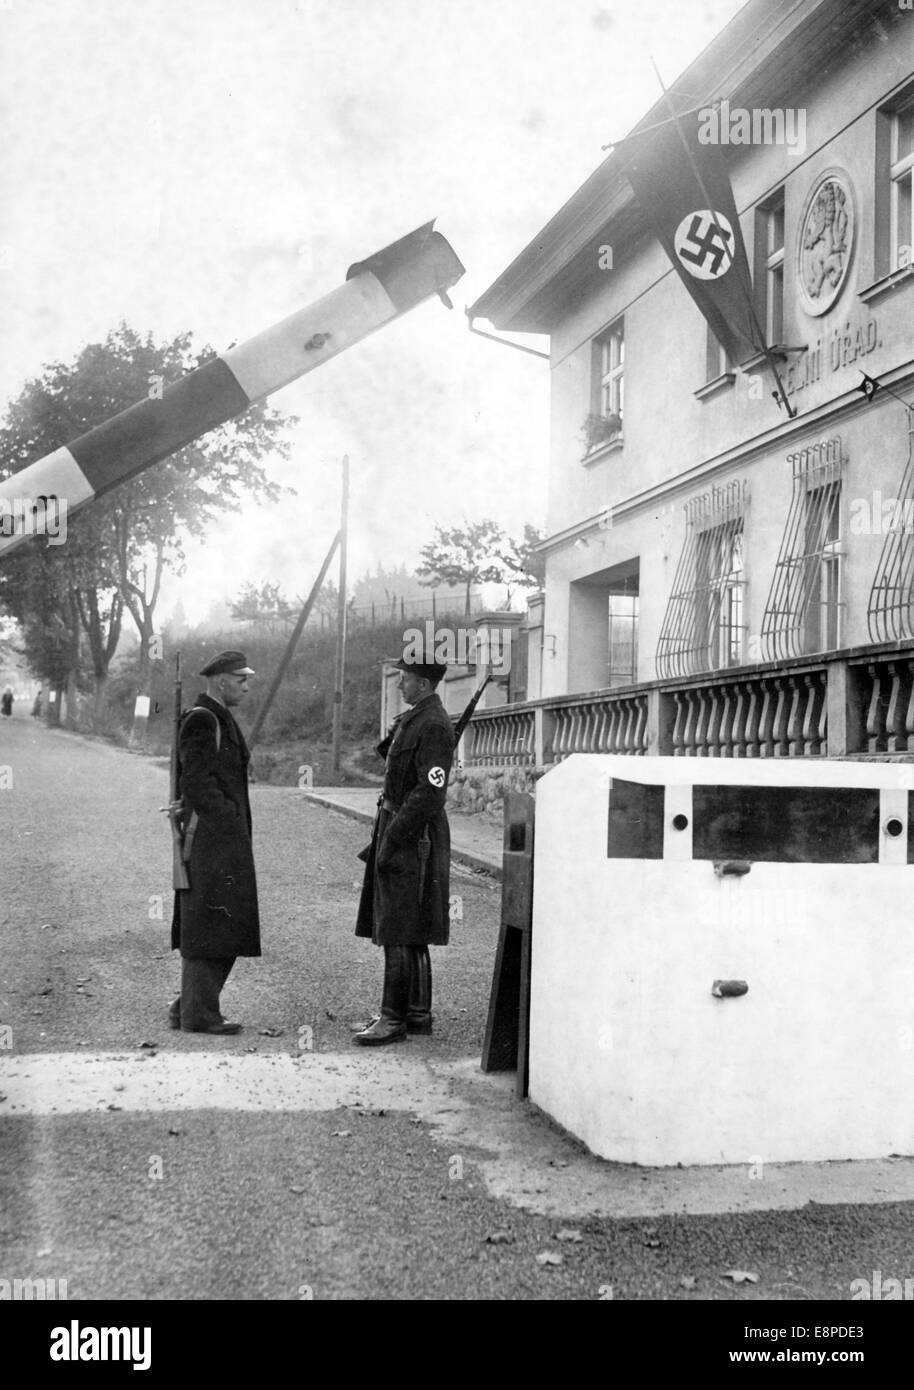 The Nazi propaganda picture shows two guards of the Sudeten German Party at a border station in the run up to the Munich Agreement near Asch, Sudetenland (today Czech Republic) in September 1938. The original text from the Nazi news service on the back of the picture reads: 'The Sudeten German resistance against the Hussite hords. Marshals of the Sudeten German Pary furnish border service on the streets of Asch. The customs building is decorated with a swastica to the right.' Fotoarchiv für Zeitgeschichtee - NO WIRE SERVICE Stock Photo